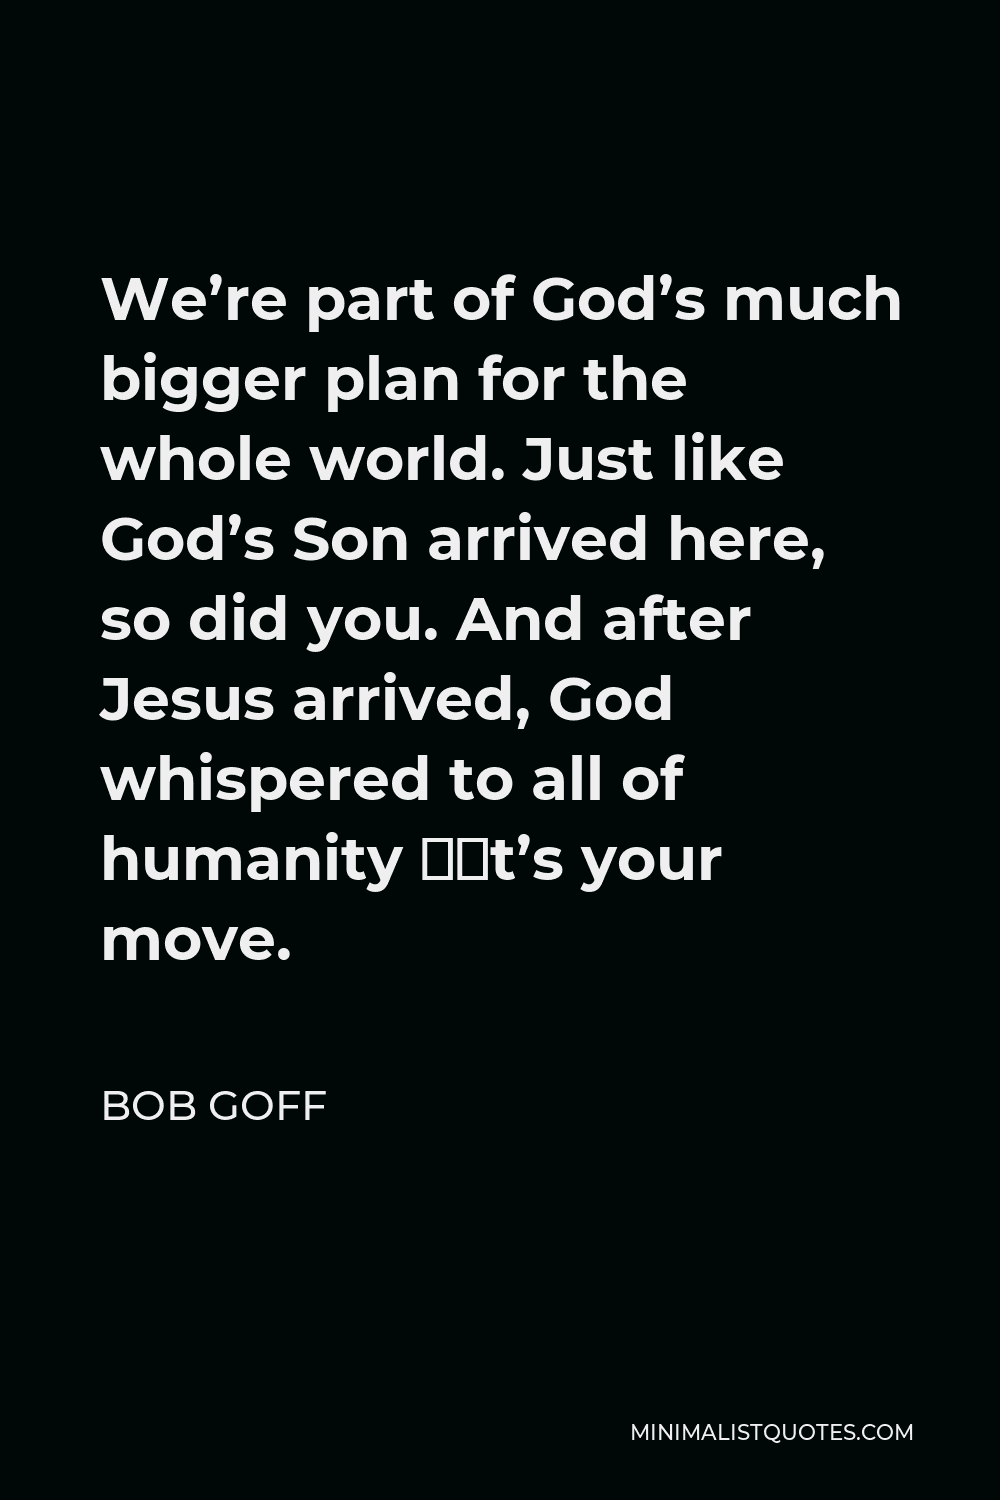 Bob Goff Quote - We’re part of God’s much bigger plan for the whole world. Just like God’s Son arrived here, so did you. And after Jesus arrived, God whispered to all of humanity “It’s your move.